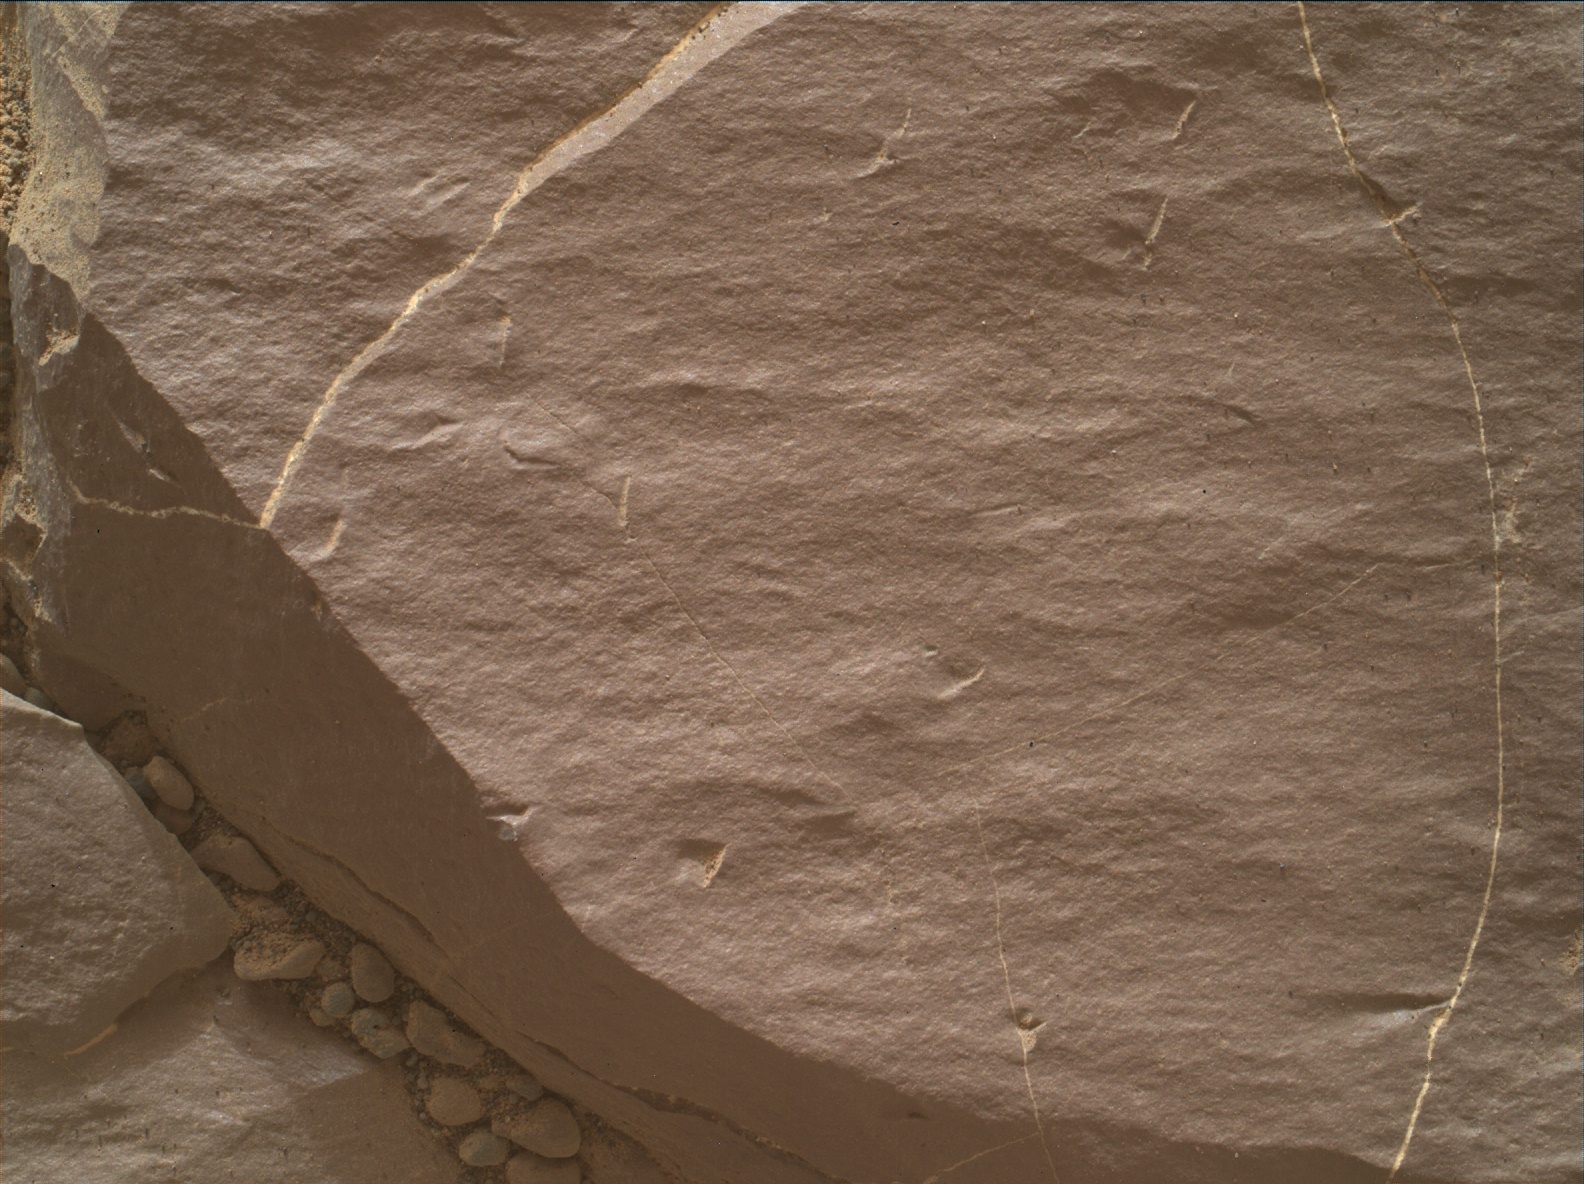 Nasa's Mars rover Curiosity acquired this image using its Mars Hand Lens Imager (MAHLI) on Sol 2255